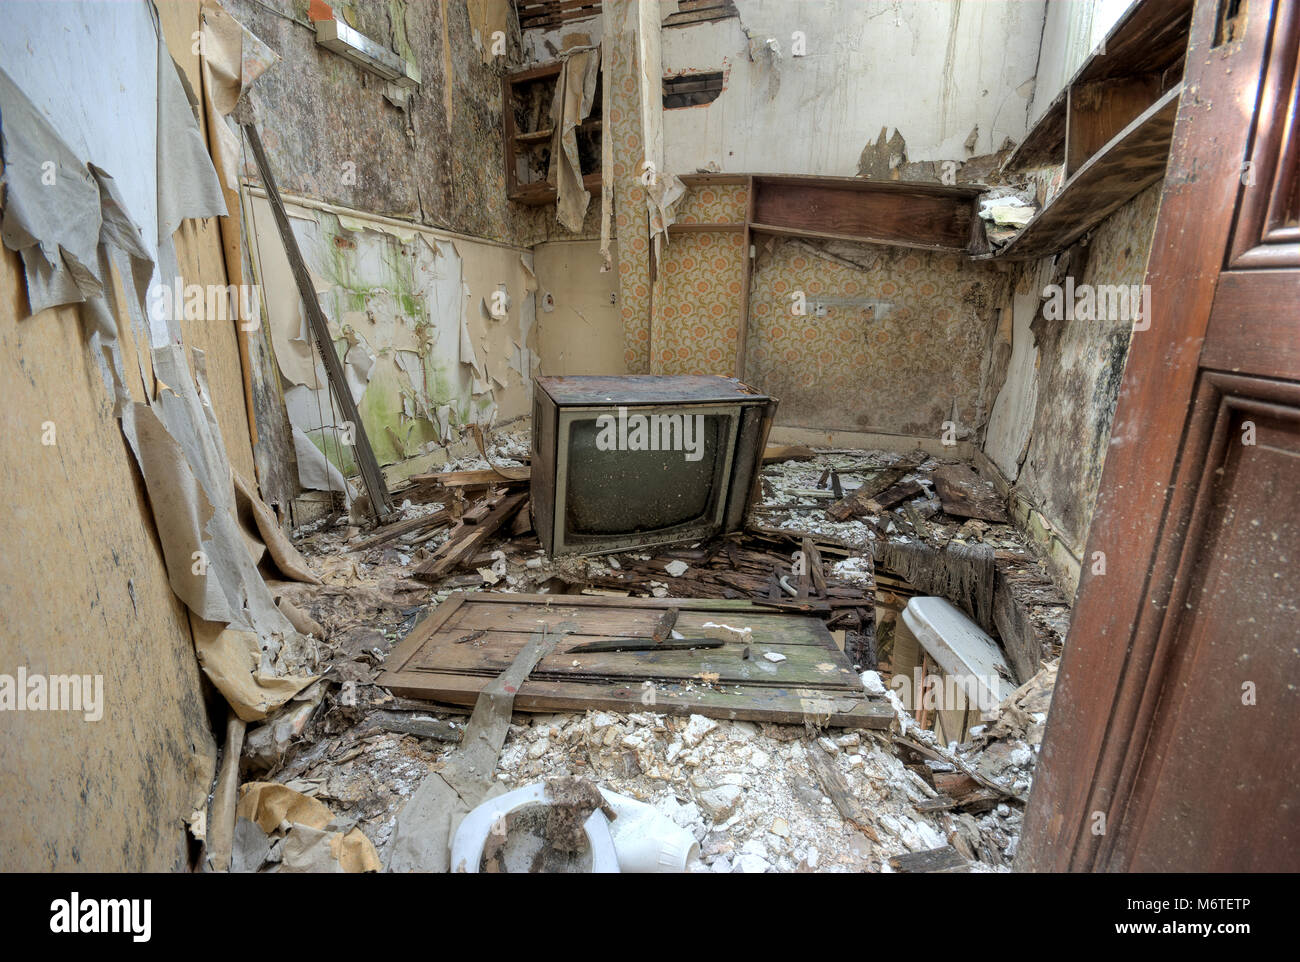 Broken TV in an abandoned house Stock Photo